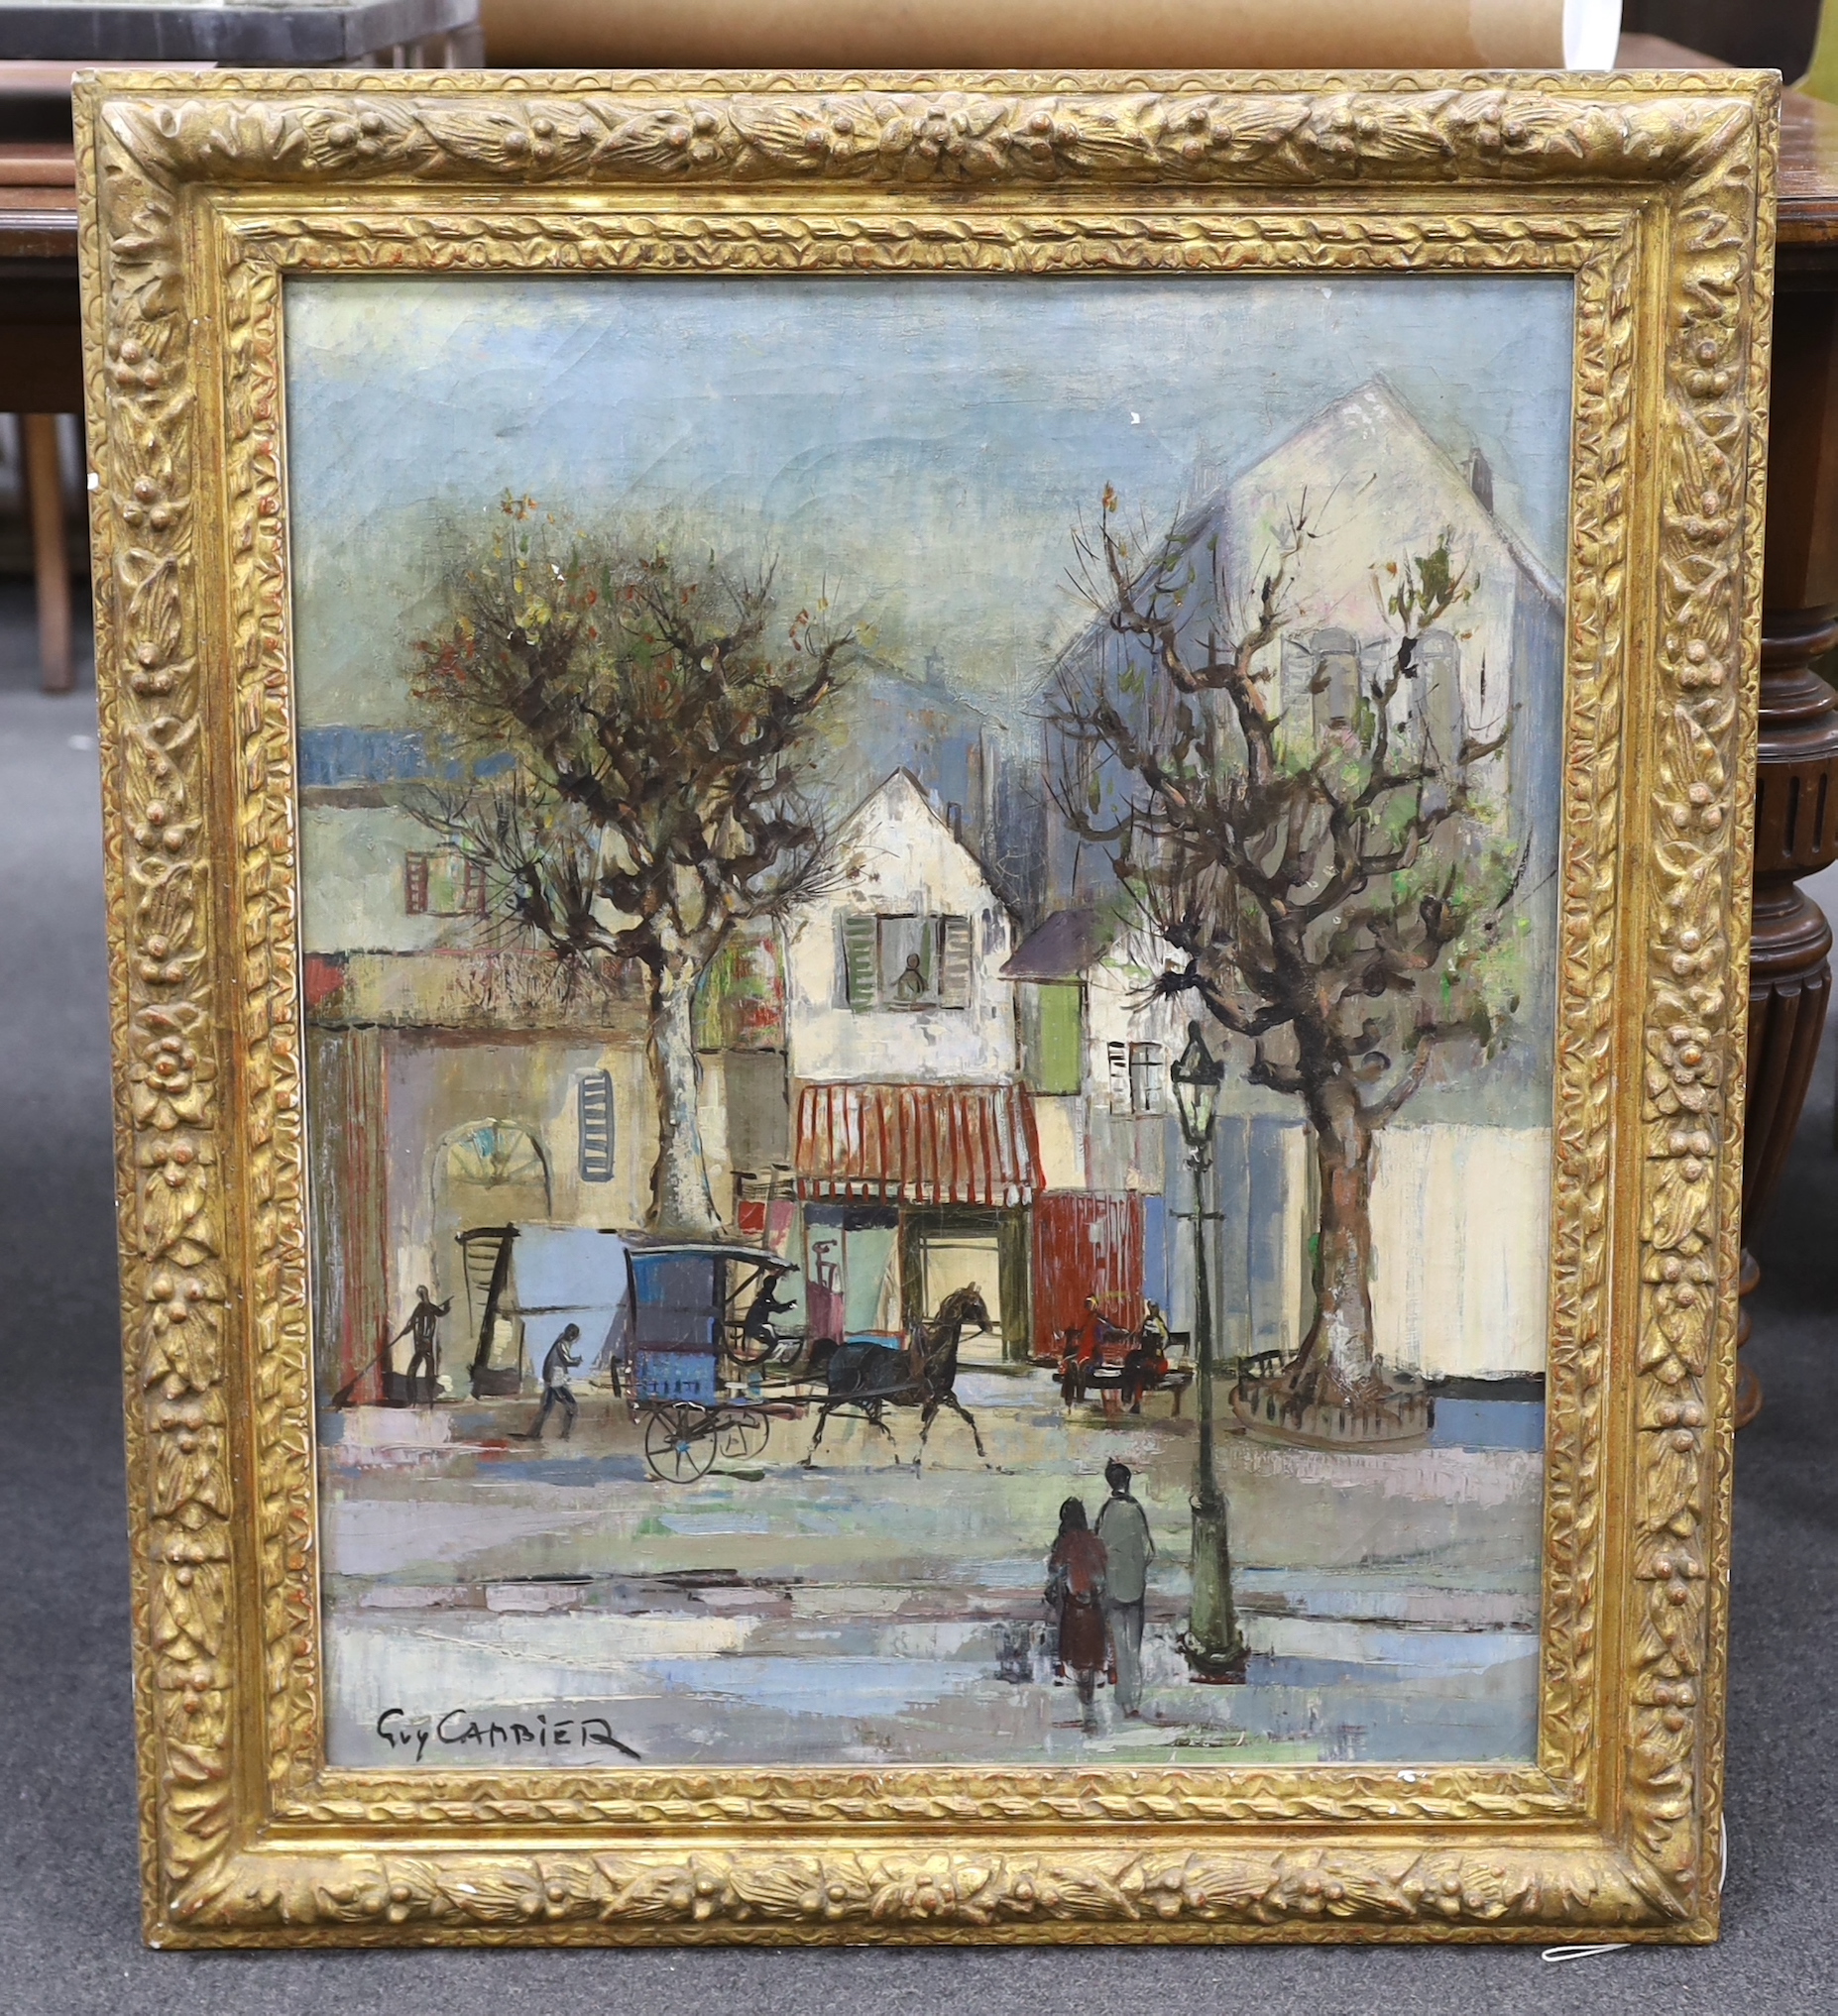 Guy Cambler (1923-2008), oil on canvas, Street scene with horse and carriage, signed, 63 x 52cm